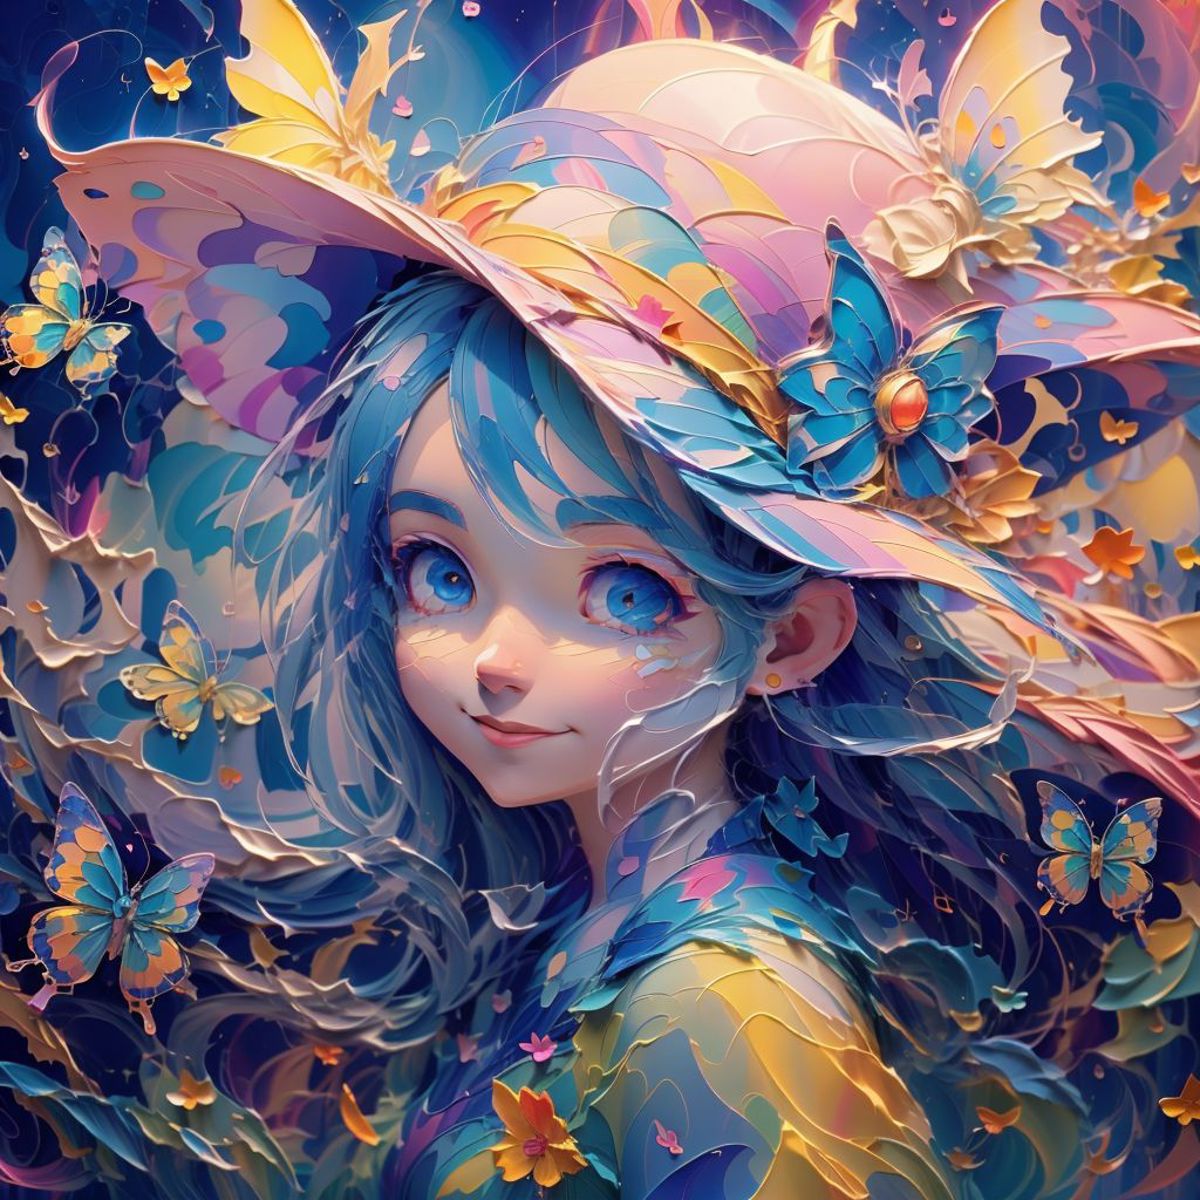 A beautifully illustrated woman wearing a colorful hat and surrounded by butterflies.